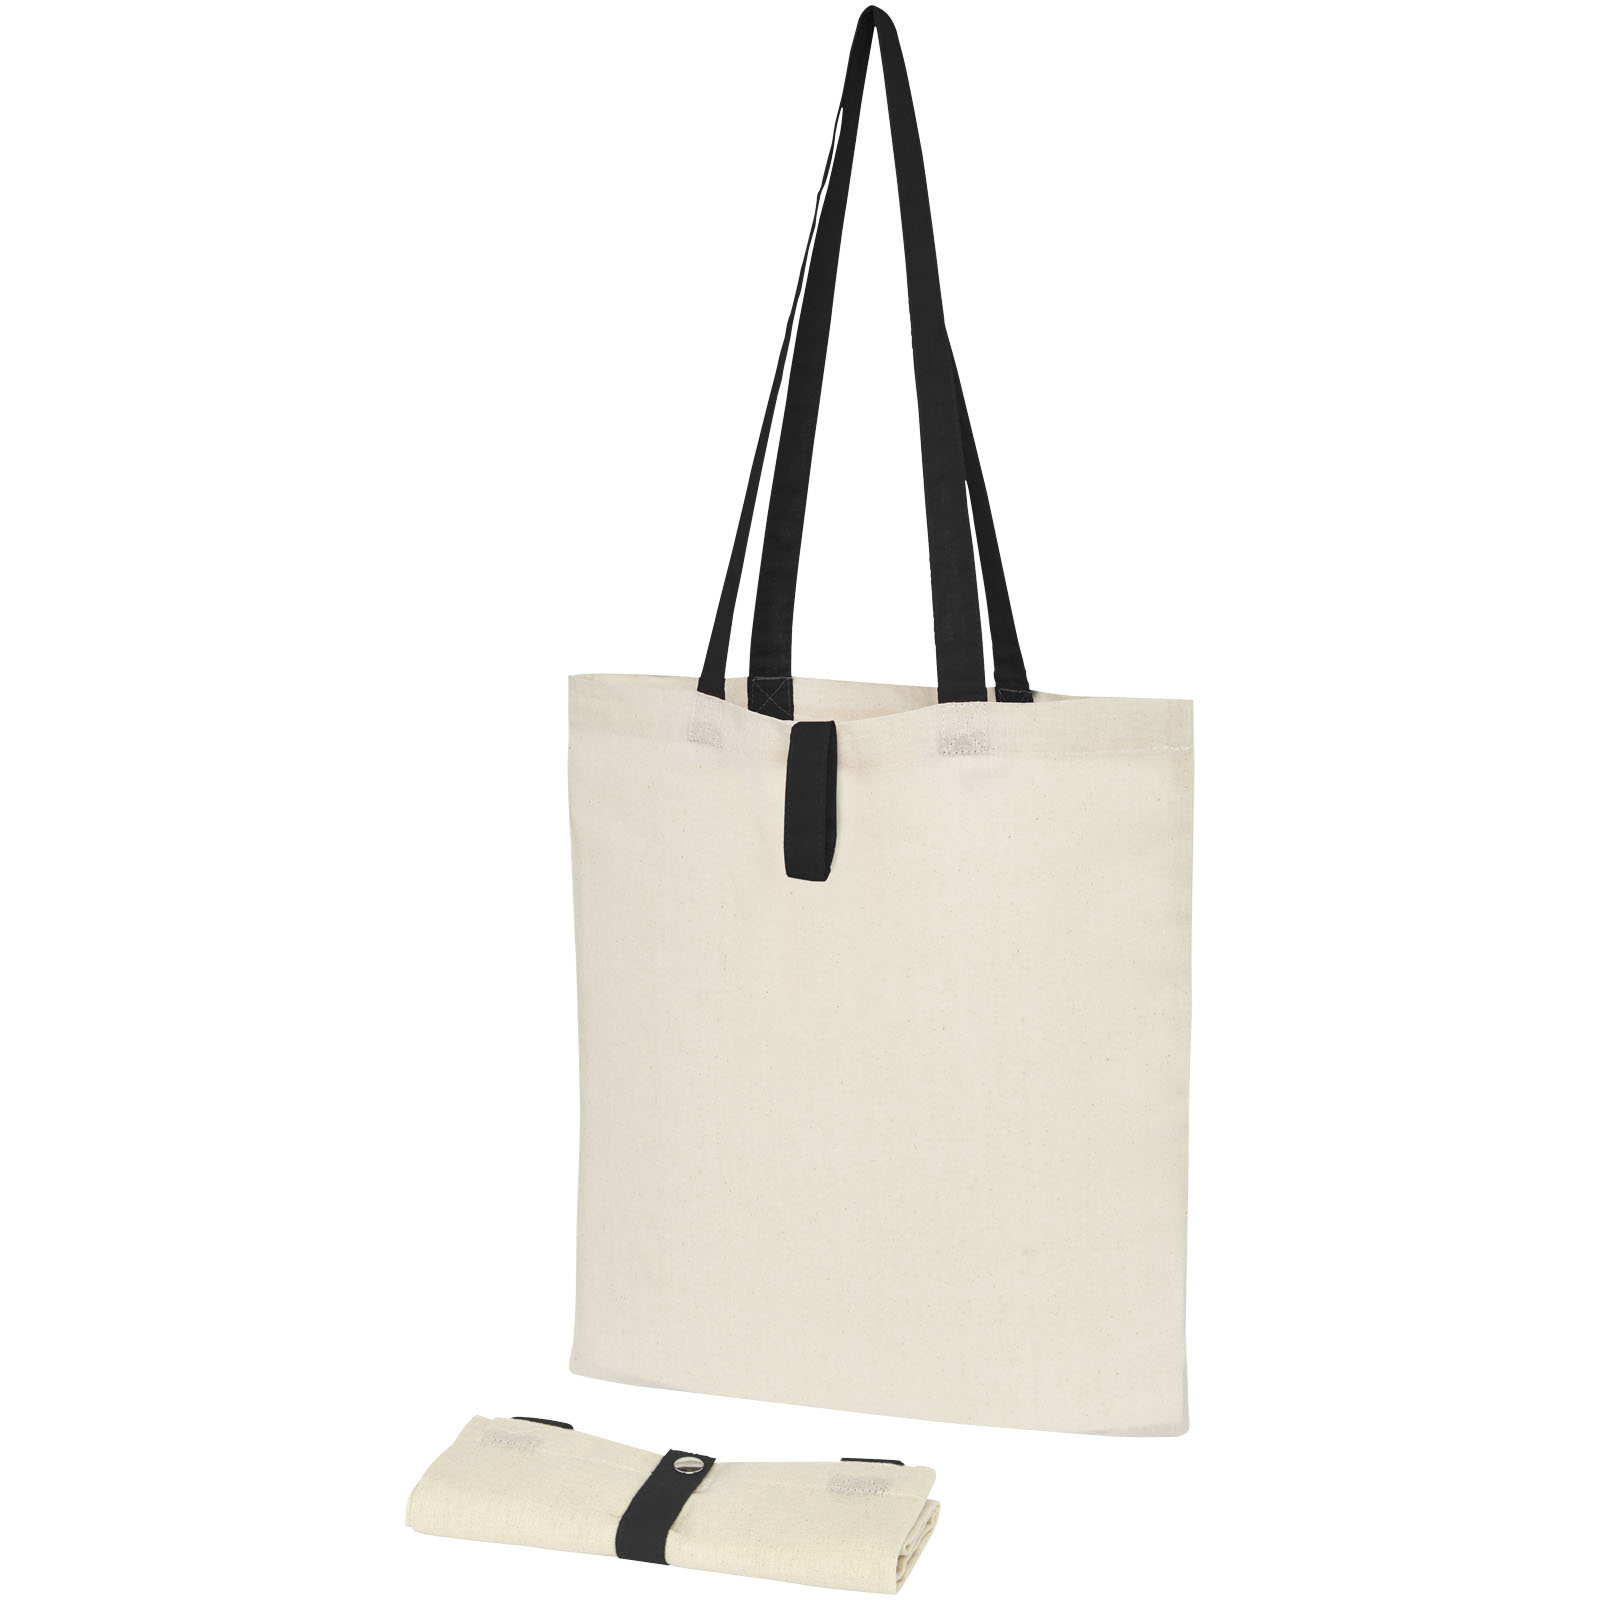 Advertising Shopping & Tote Bags - Nevada 100 g/m² cotton foldable tote bag 7L - 4